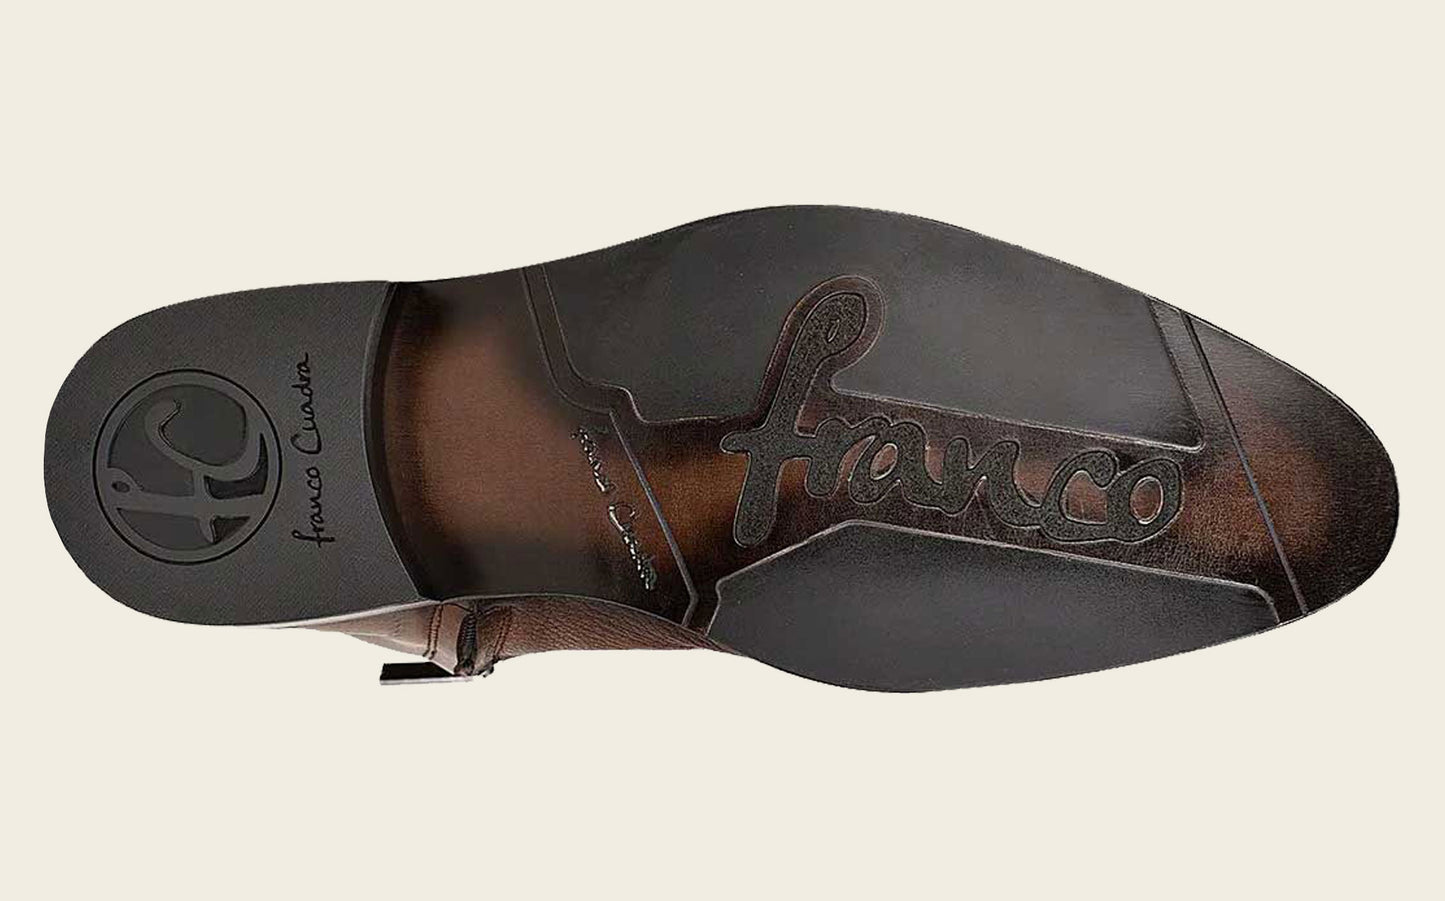 Internal closure & TPU sole: Comfort & confidence in Cuadra's deer leather boots. 